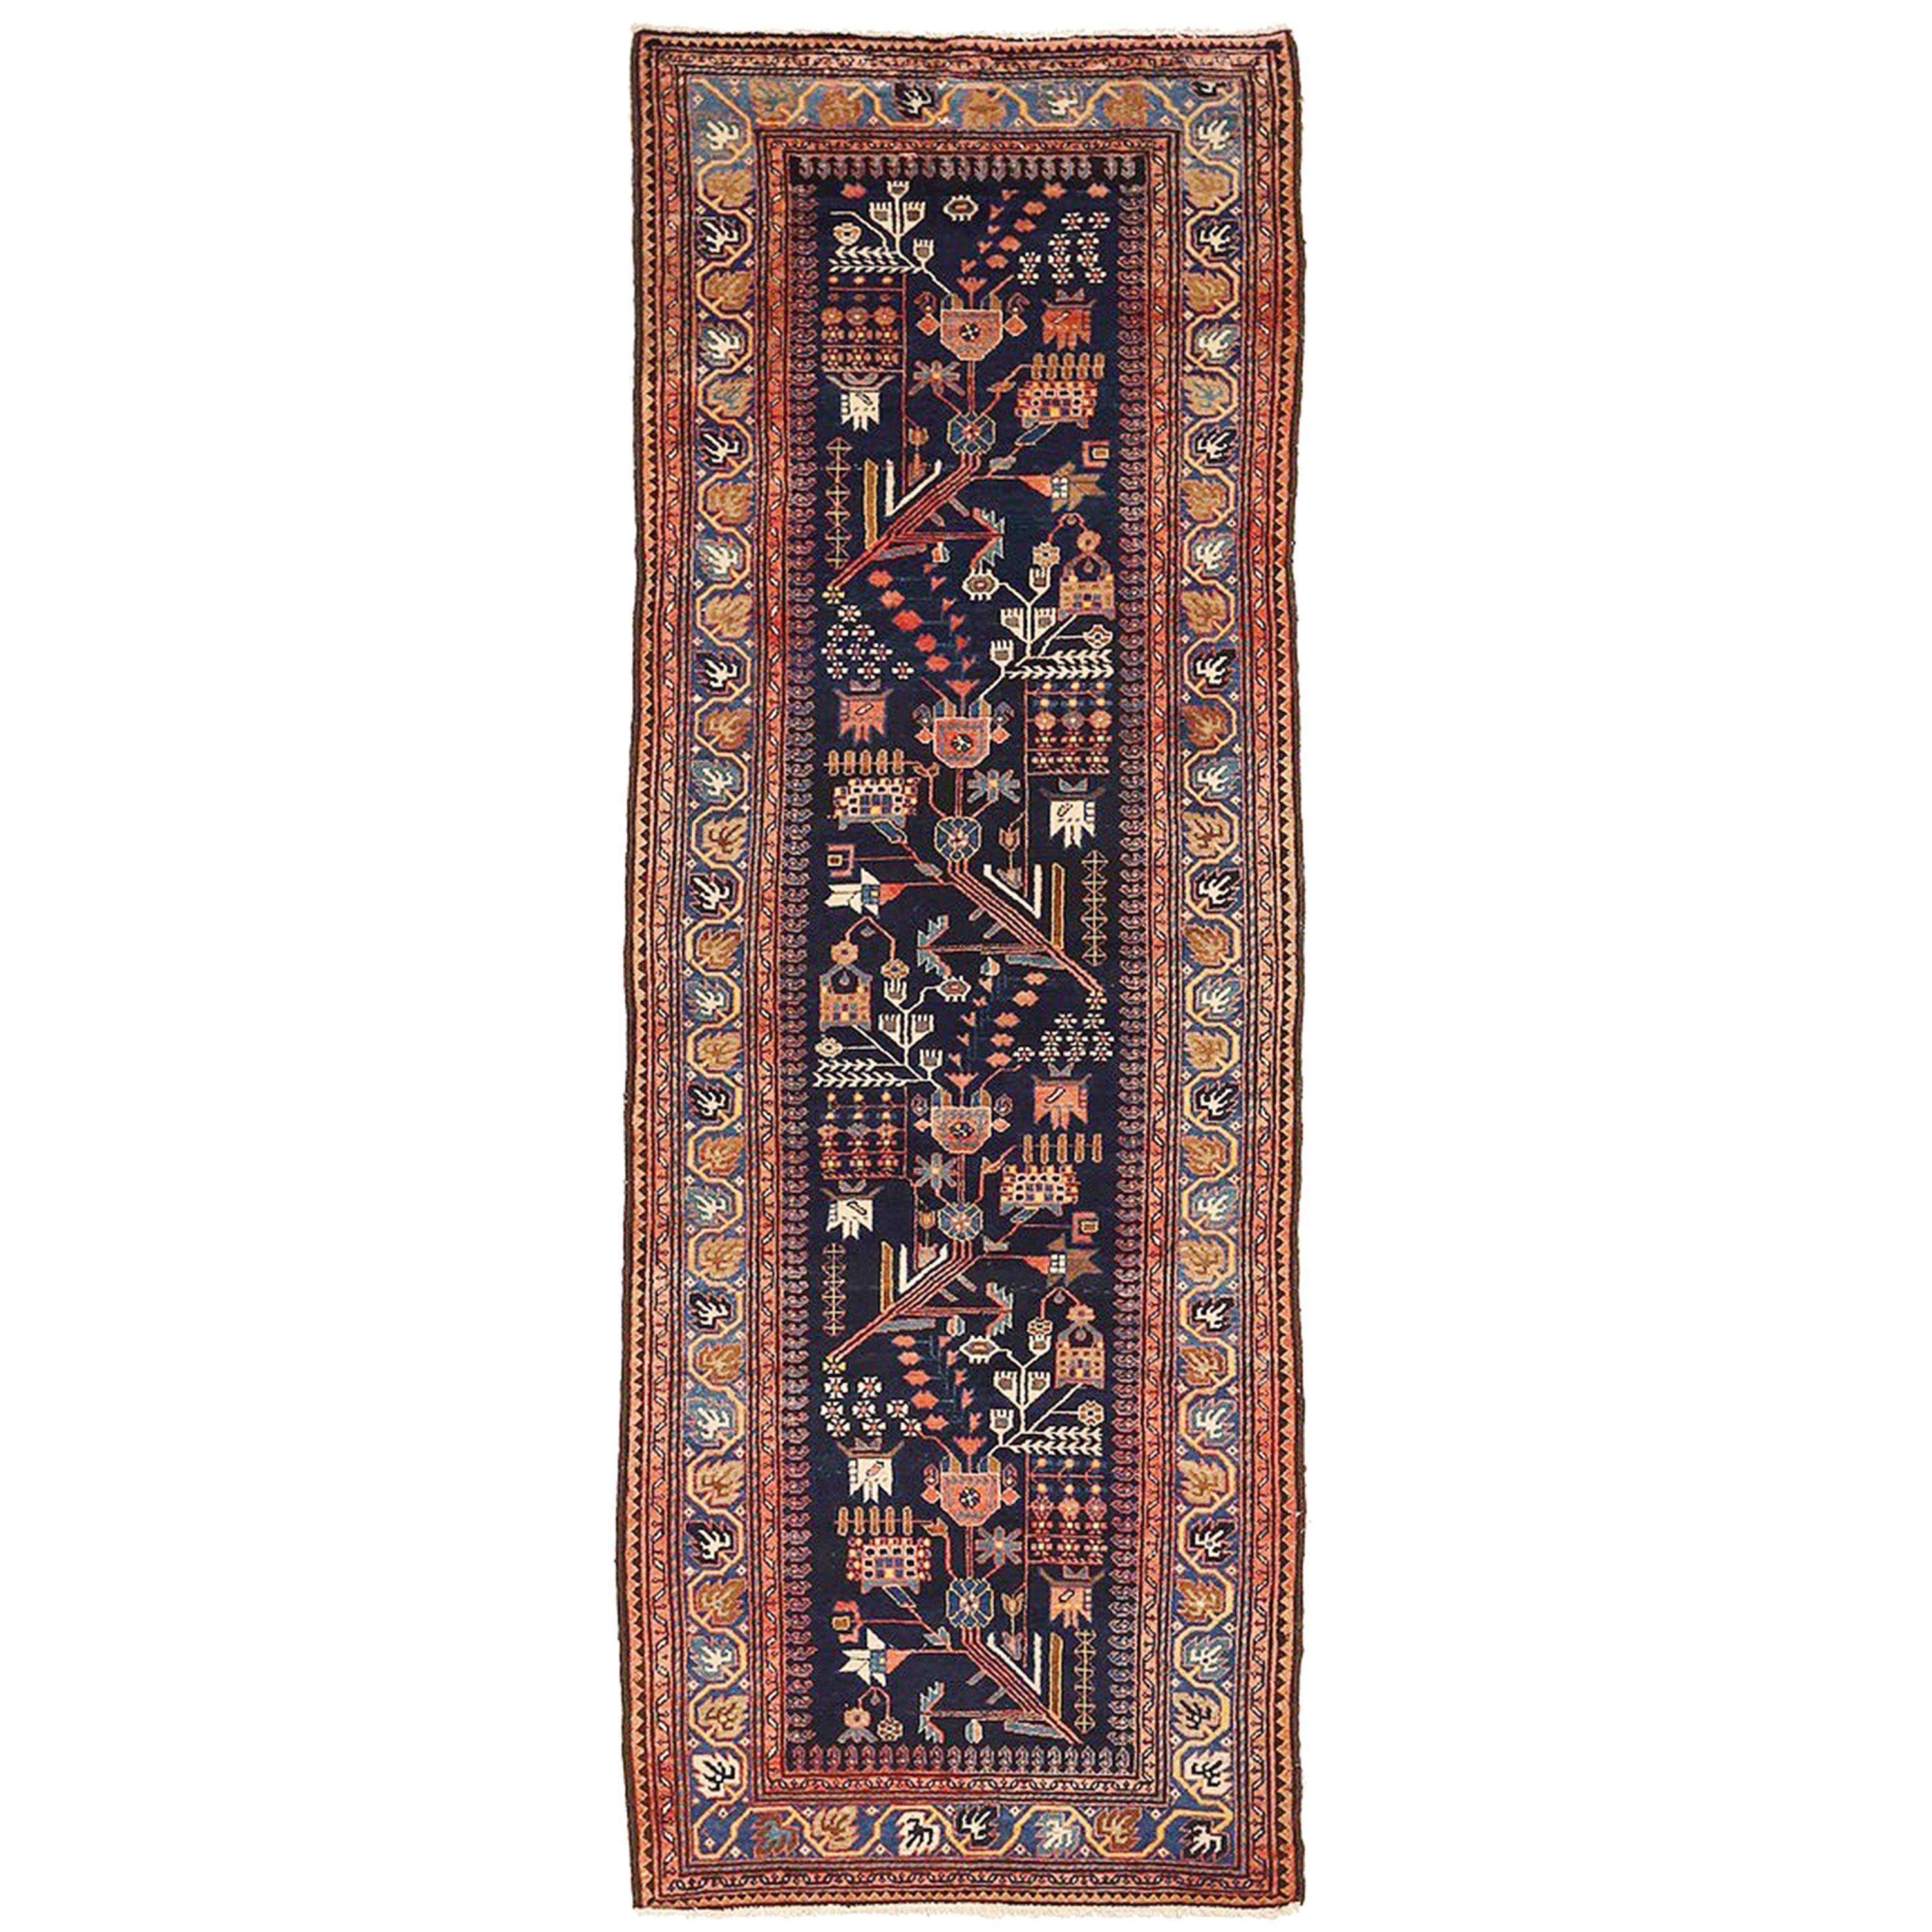 1900s Antique Persian Malayer Runner Rug with Floral Motifs Allover